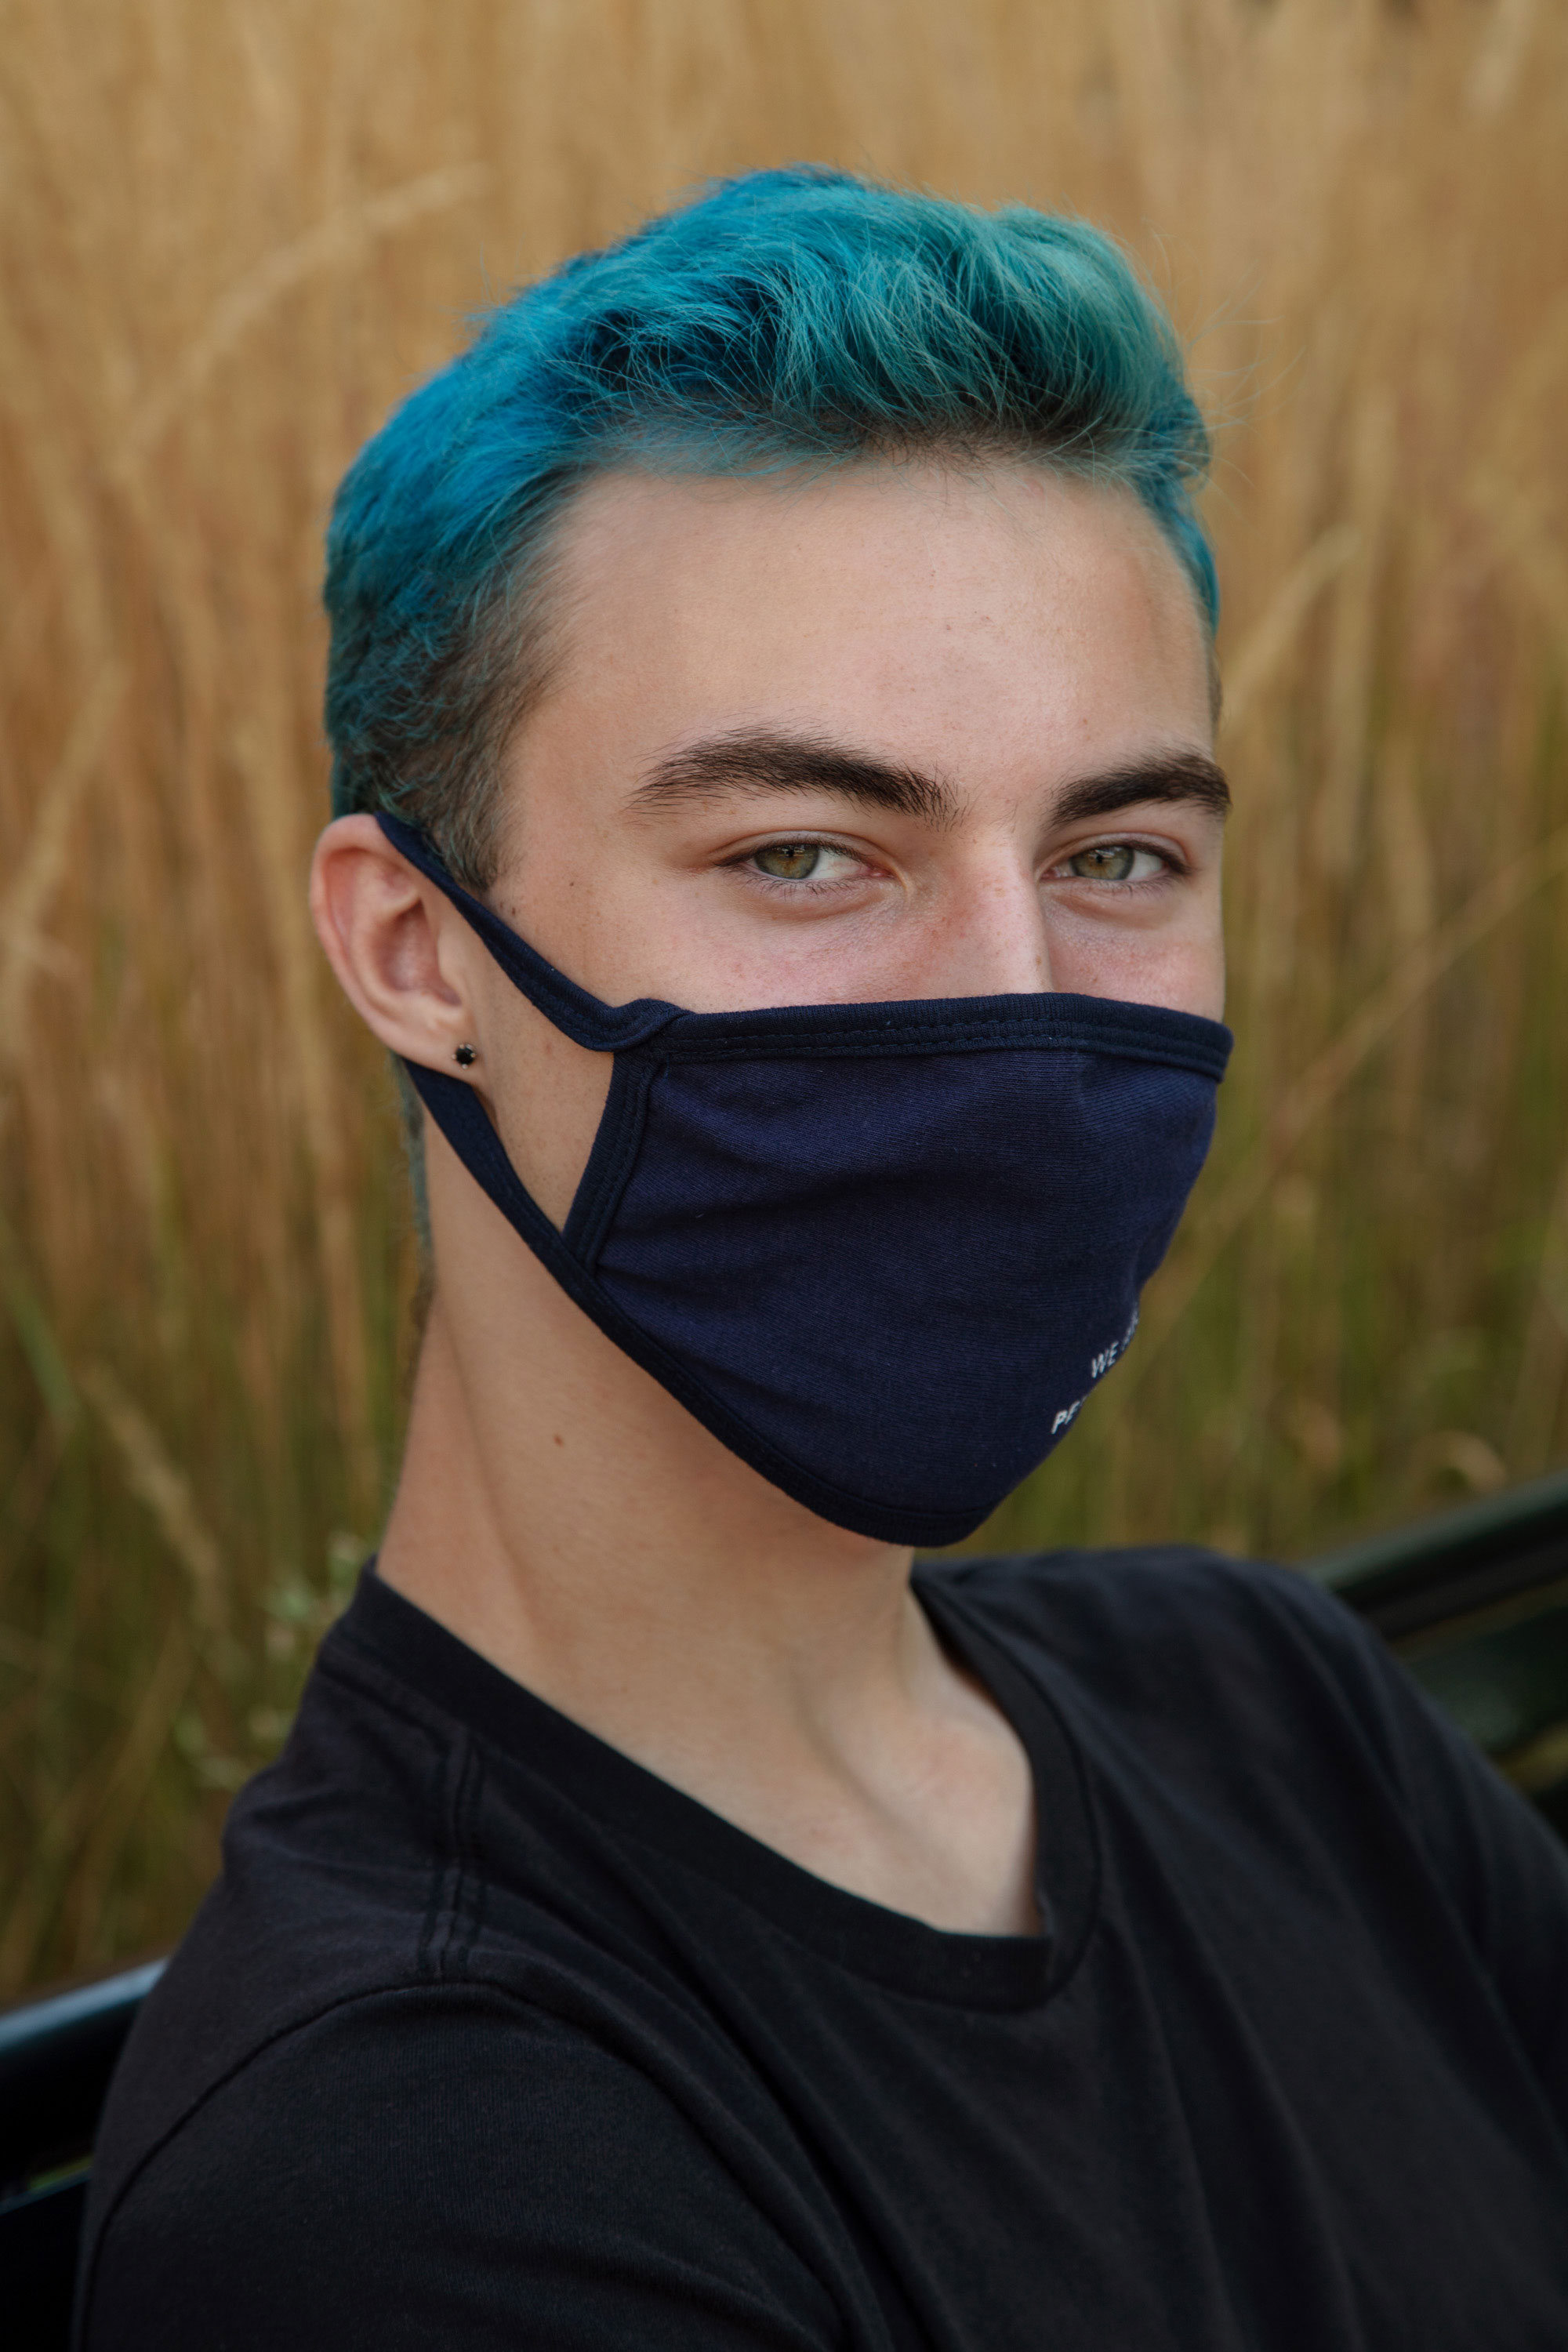 Aidan Brandt, 18, Freshman. “There is kind of a general fear of going home because people choose not to wear the masks, and there have been block parties and stuff.” (Eva O'Leary for TIME)